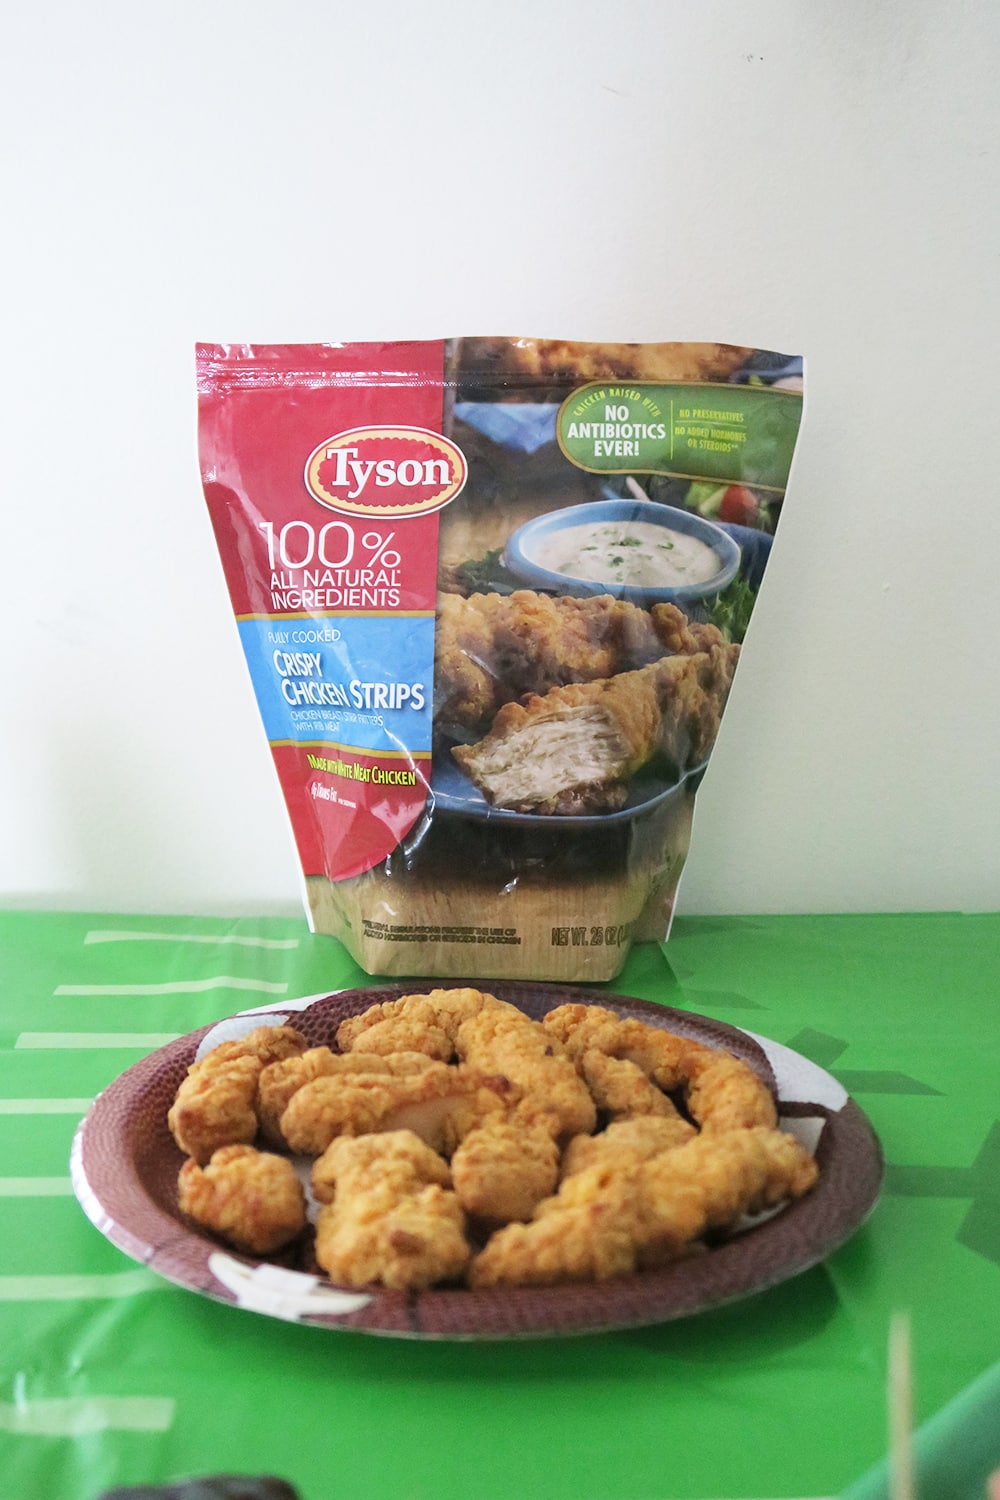 In need of some game day inspiration? These easy game day snack ideas will fill your belly with deliciousness! Plus, this zesty fry sauce recipe will be a touchdown for the whole family, kids included!